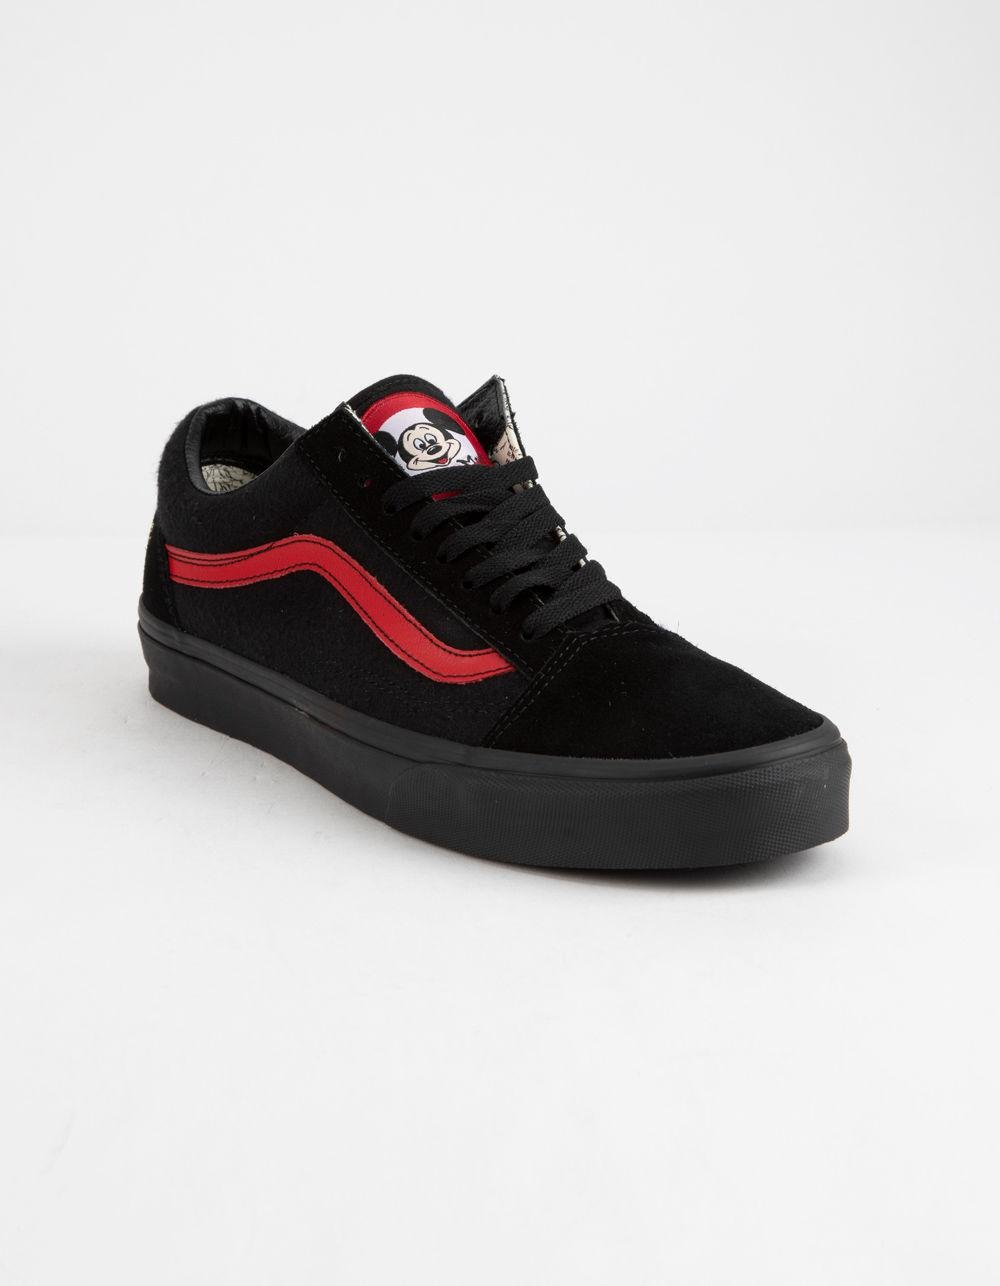 mickey mouse club vans